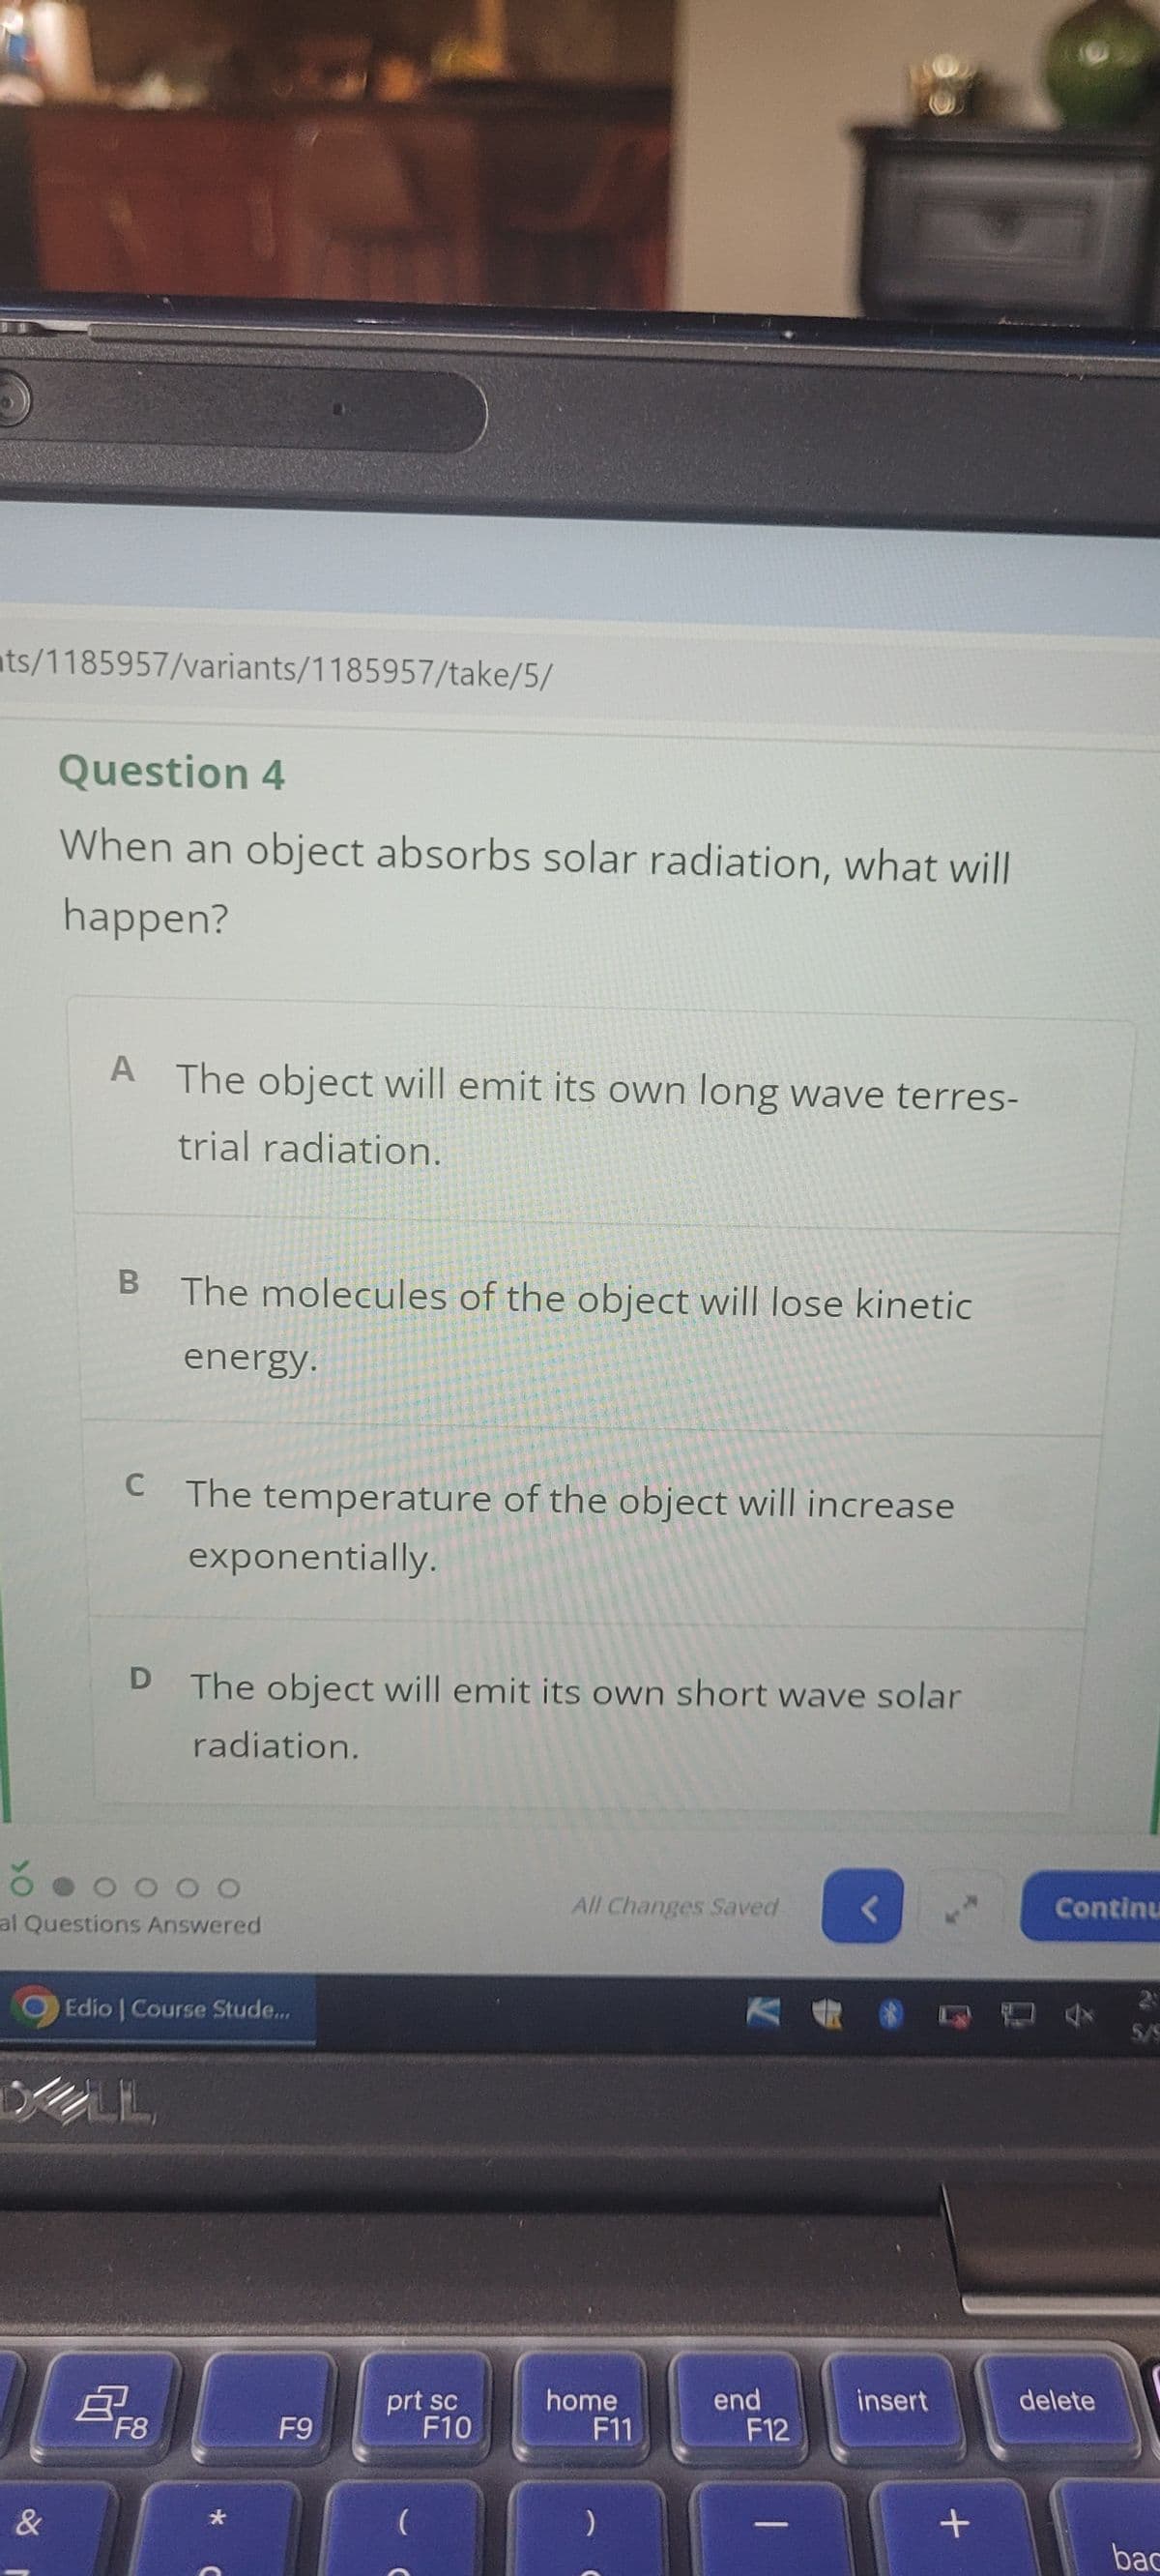 ts/1185957/variants/1185957/take/5/
Question 4
When an object absorbs solar radiation, what will
happen?
A The object will emit its own long wave terres-
trial radiation.
B
The molecules of the object will lose kinetic
energy.
C The temperature of the object will increase
exponentially.
D
The object will emit its own short wave solar
radiation.
000O
al Questions Answered
&
Edio | Course Stude...
B
F8
*
G9
F9
All Changes Saved
<
Continu
KA
prt sc
F10
home
F11
end
insert
delete
F12
)
2
5/9
+
bac